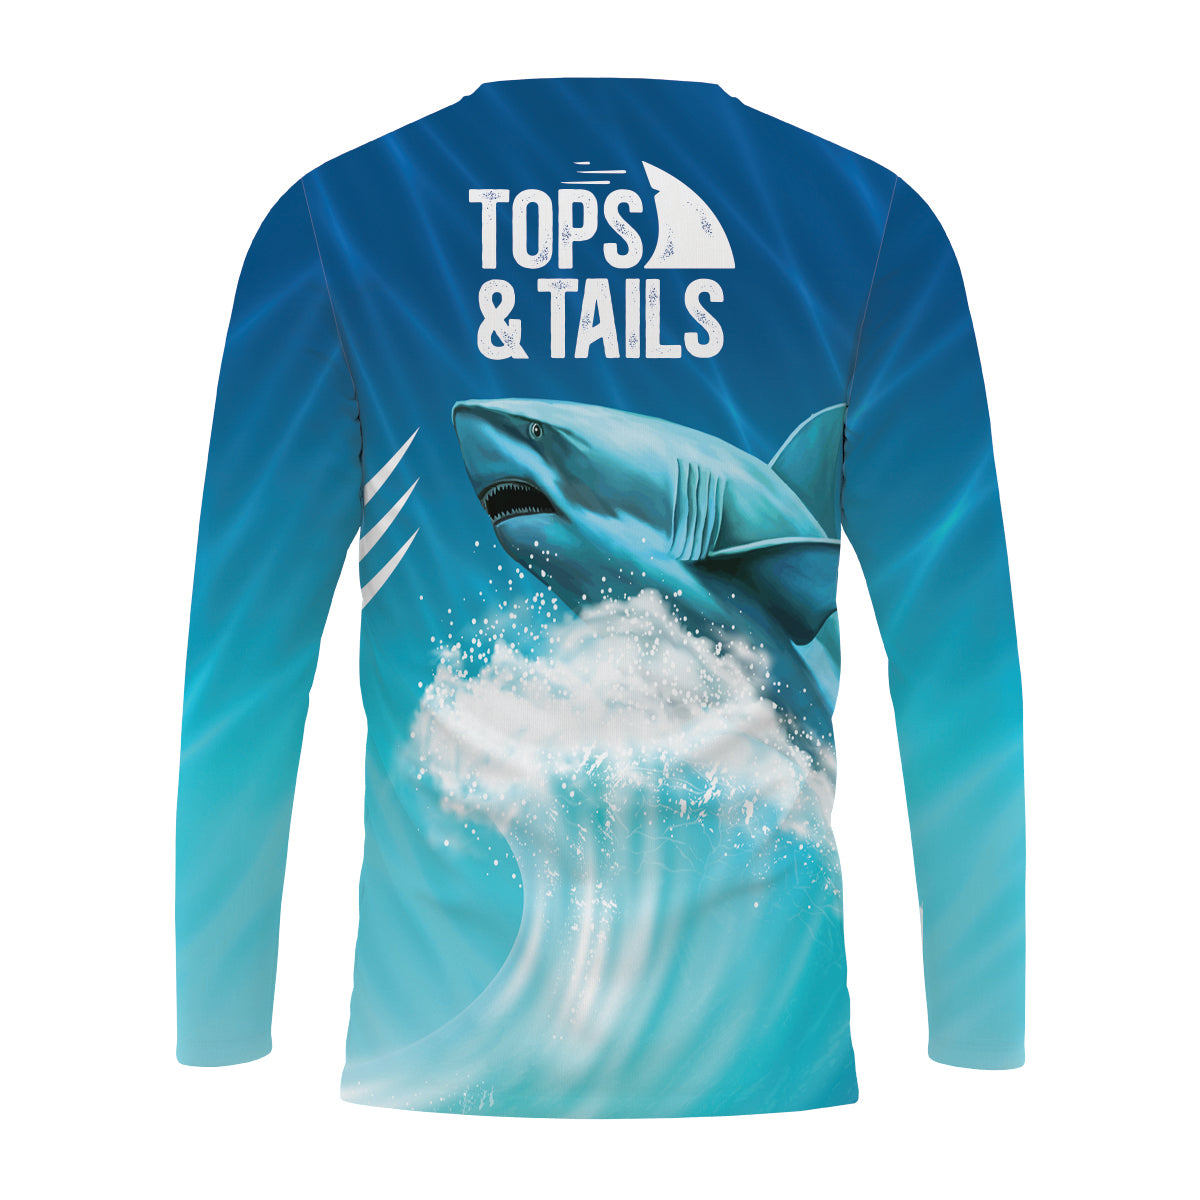 Shark on a Wave Long Sleeve Performance Shirt - Made in the USA